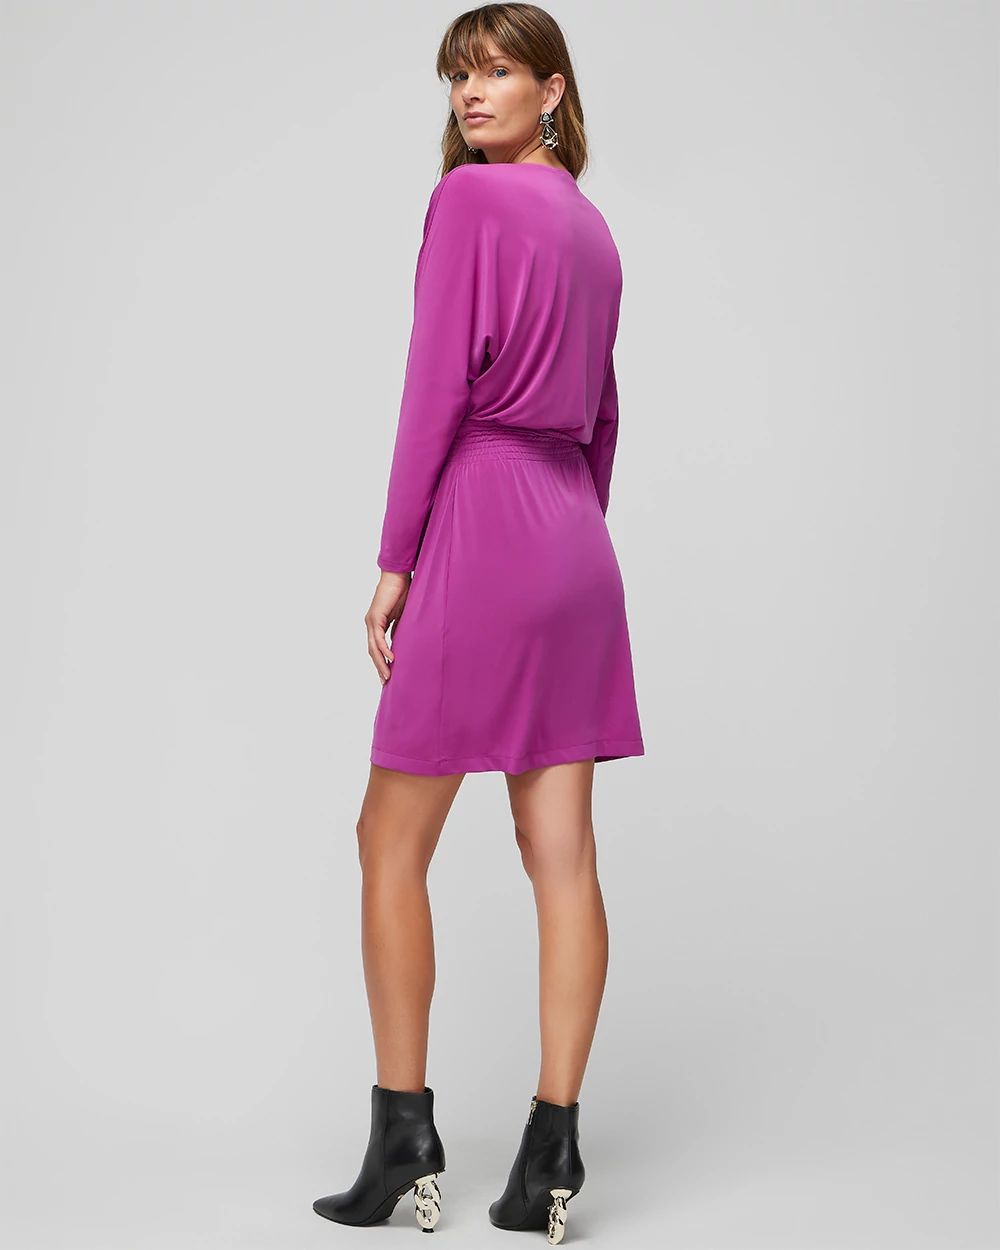 Long Sleeve Smocked Matte Jersey Dolman Dress click to view larger image.